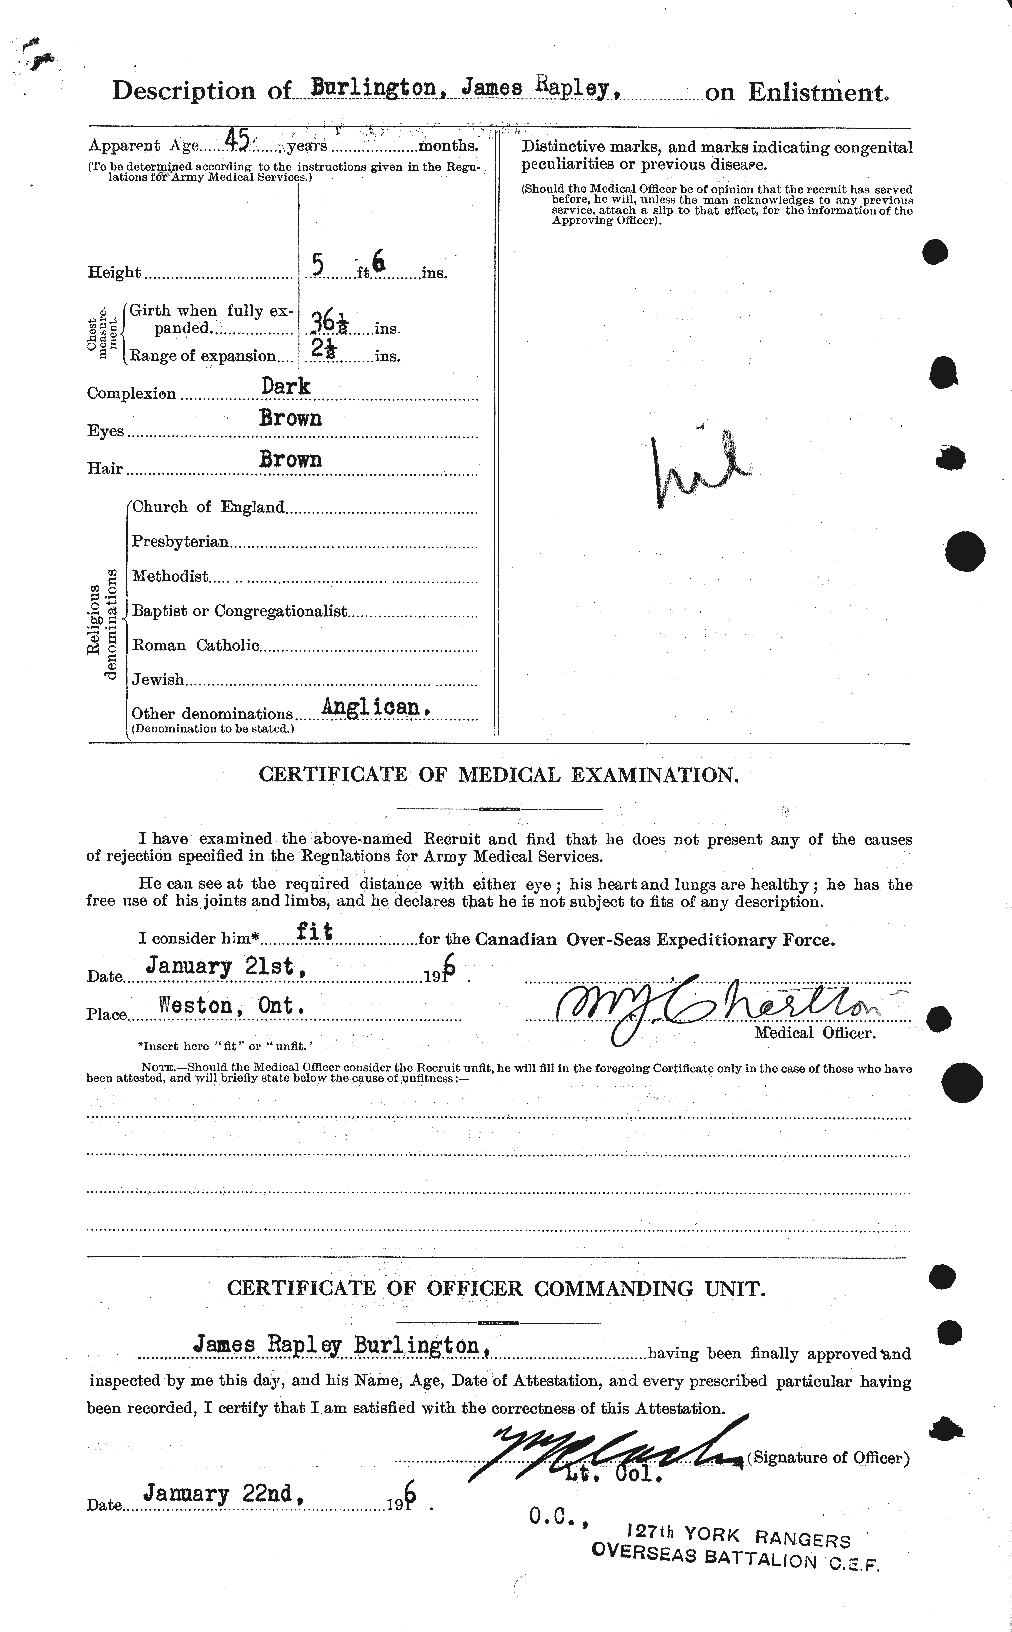 Personnel Records of the First World War - CEF 271885b